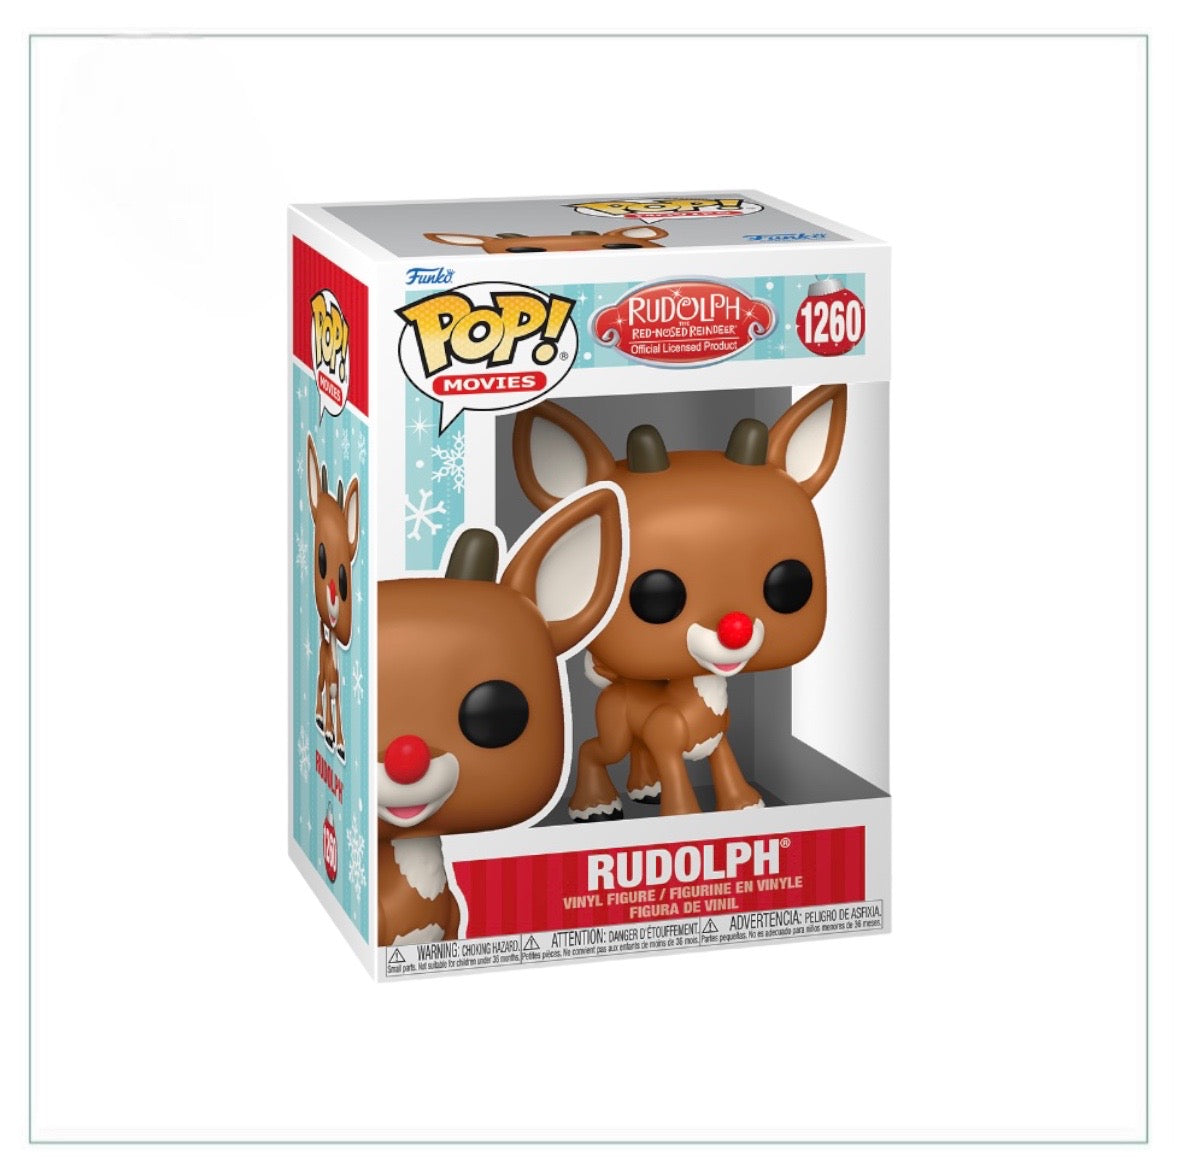 Rudolph #1260 Funko Pop! - Rudolph the Red-Nosed Reindeer